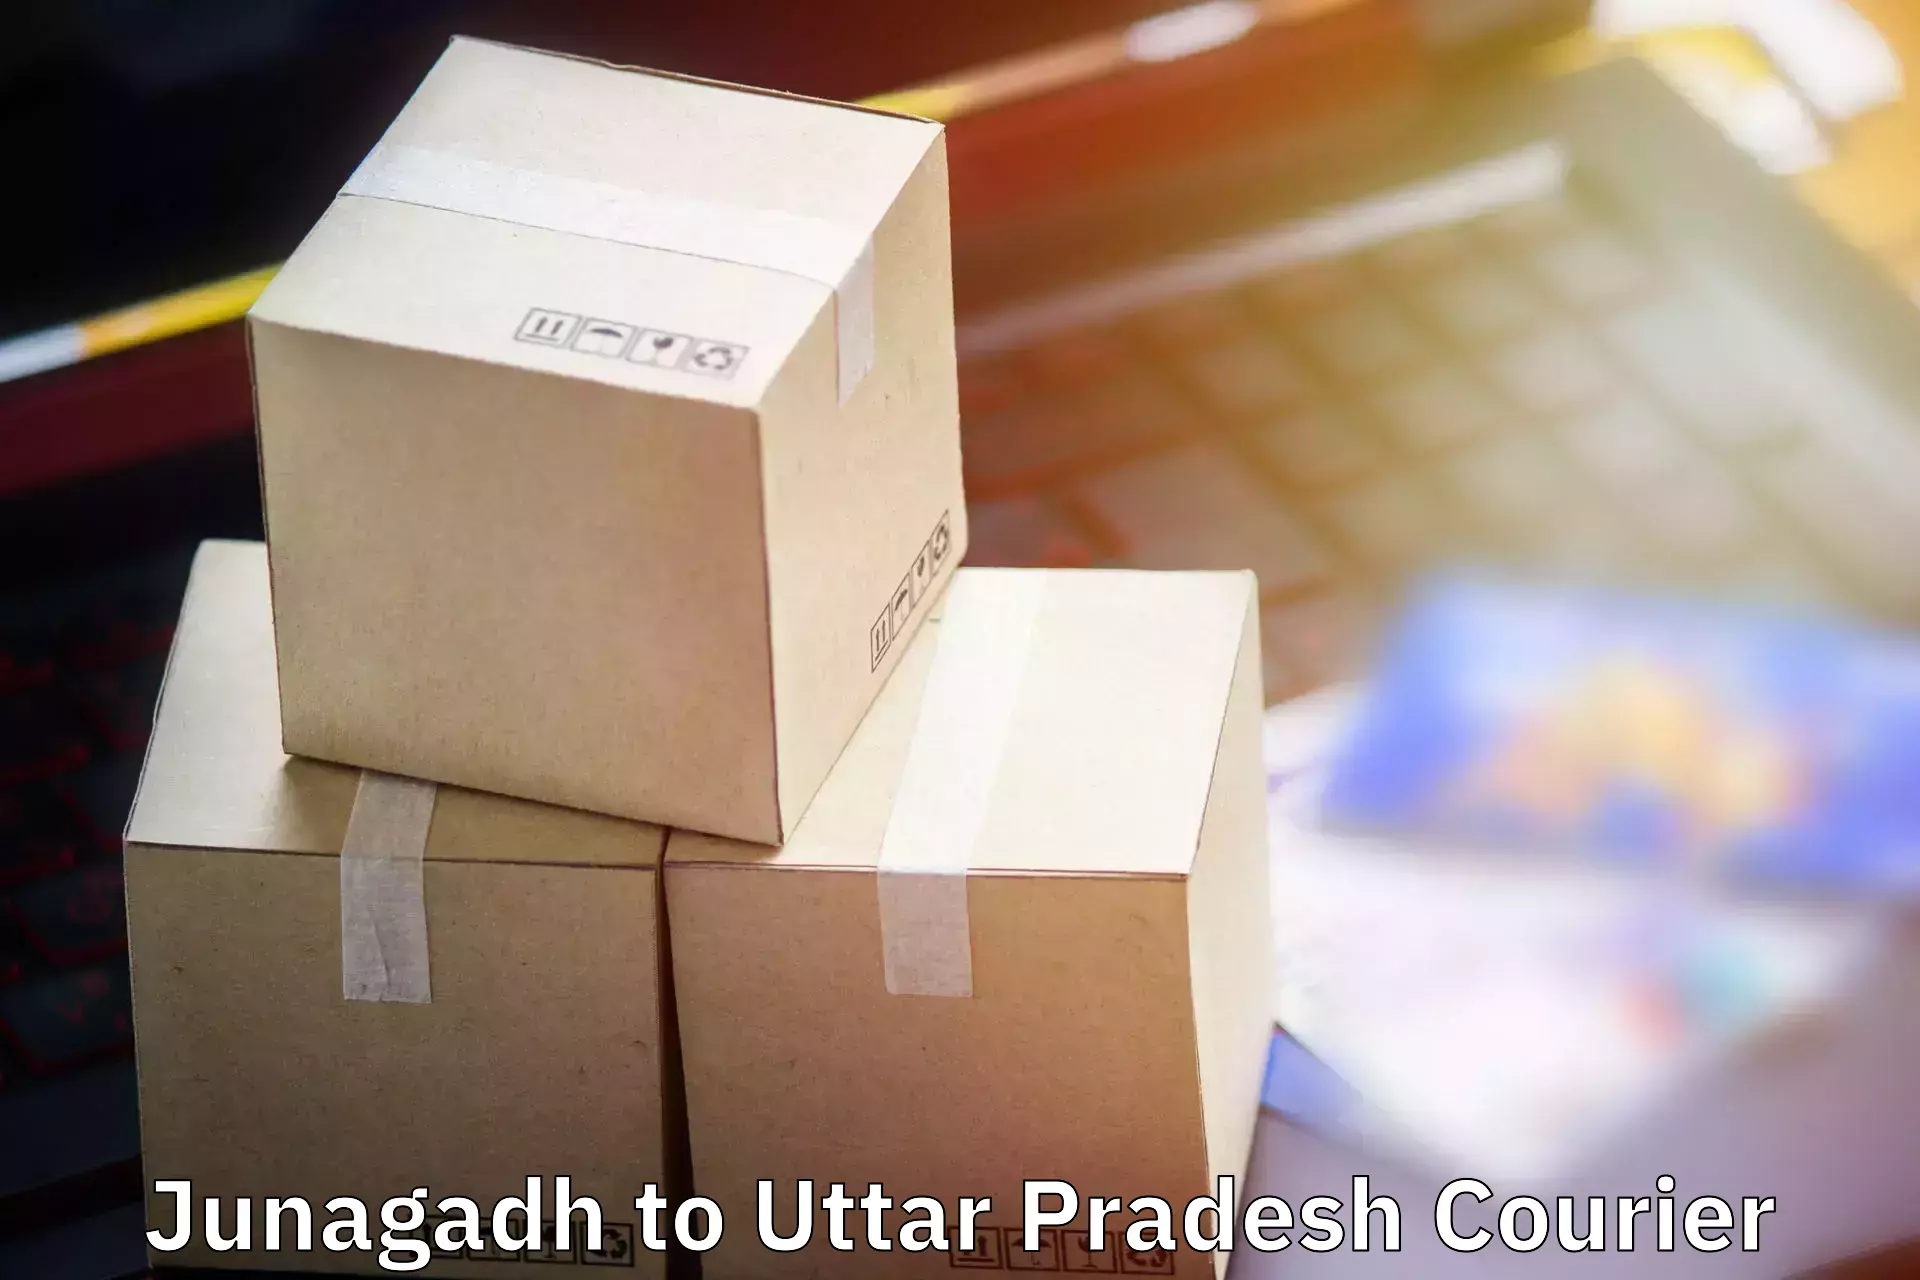 Personal effects shipping Junagadh to Sultanpur